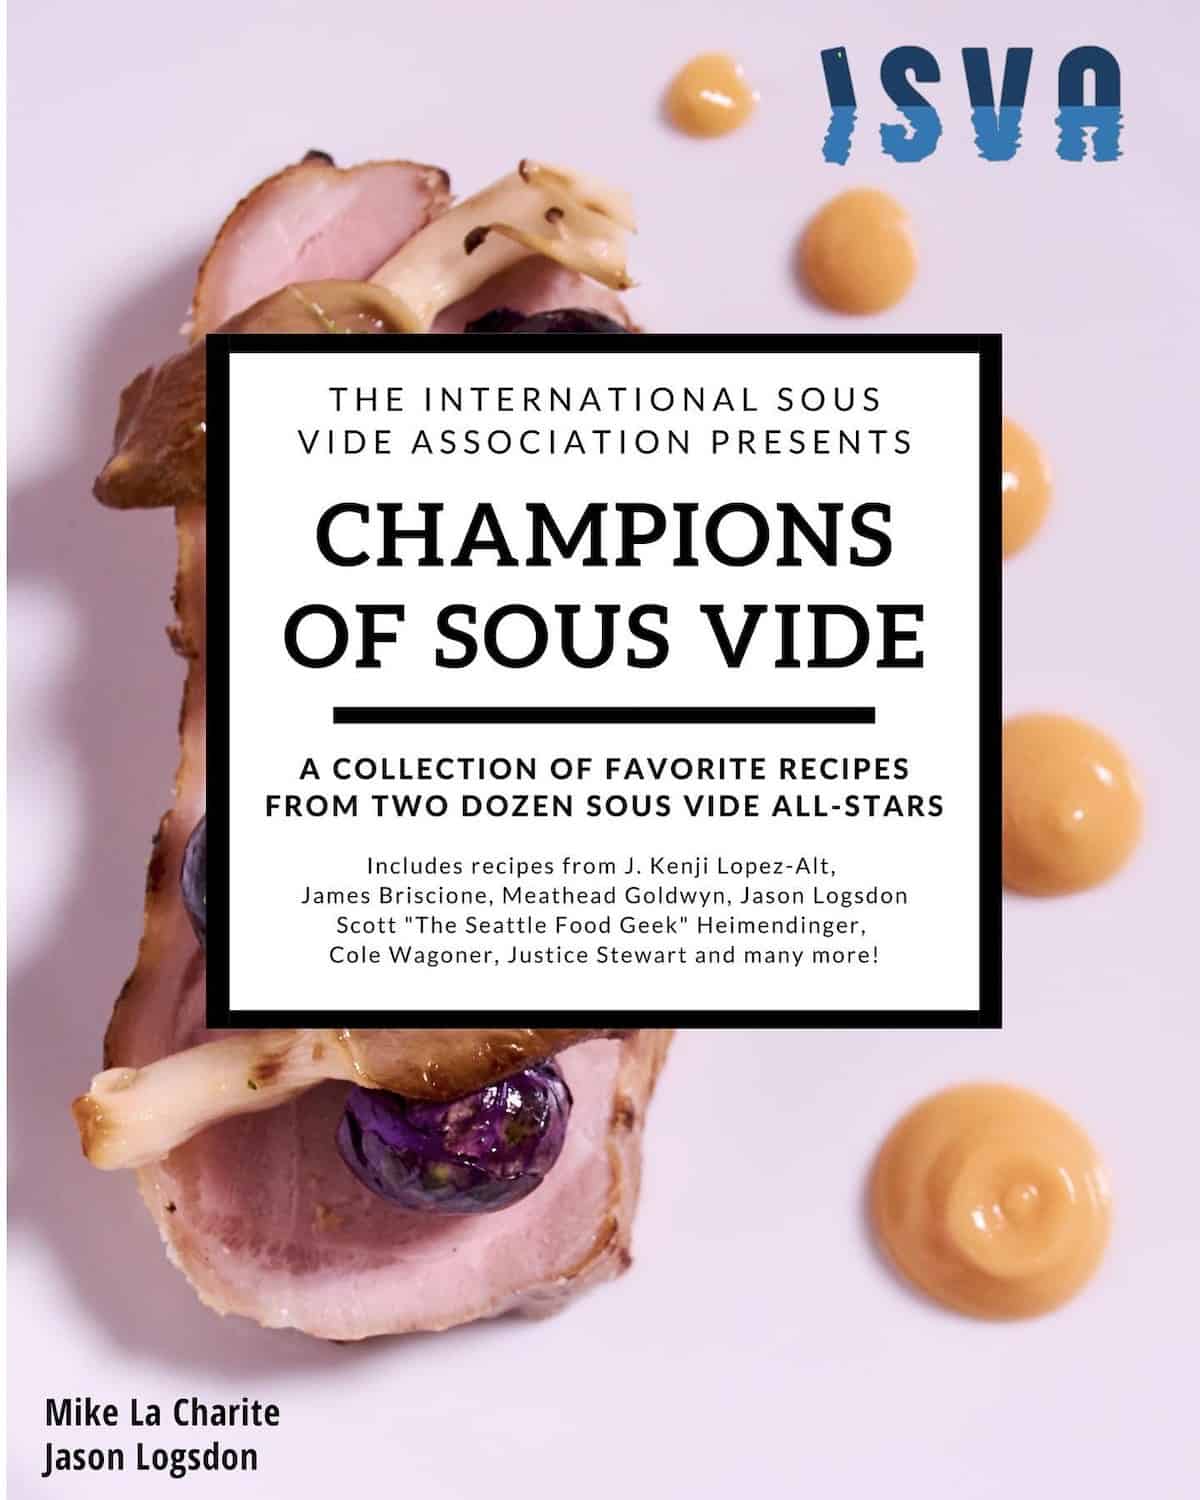 Champions of Sous Vide cookbook provides great learning.